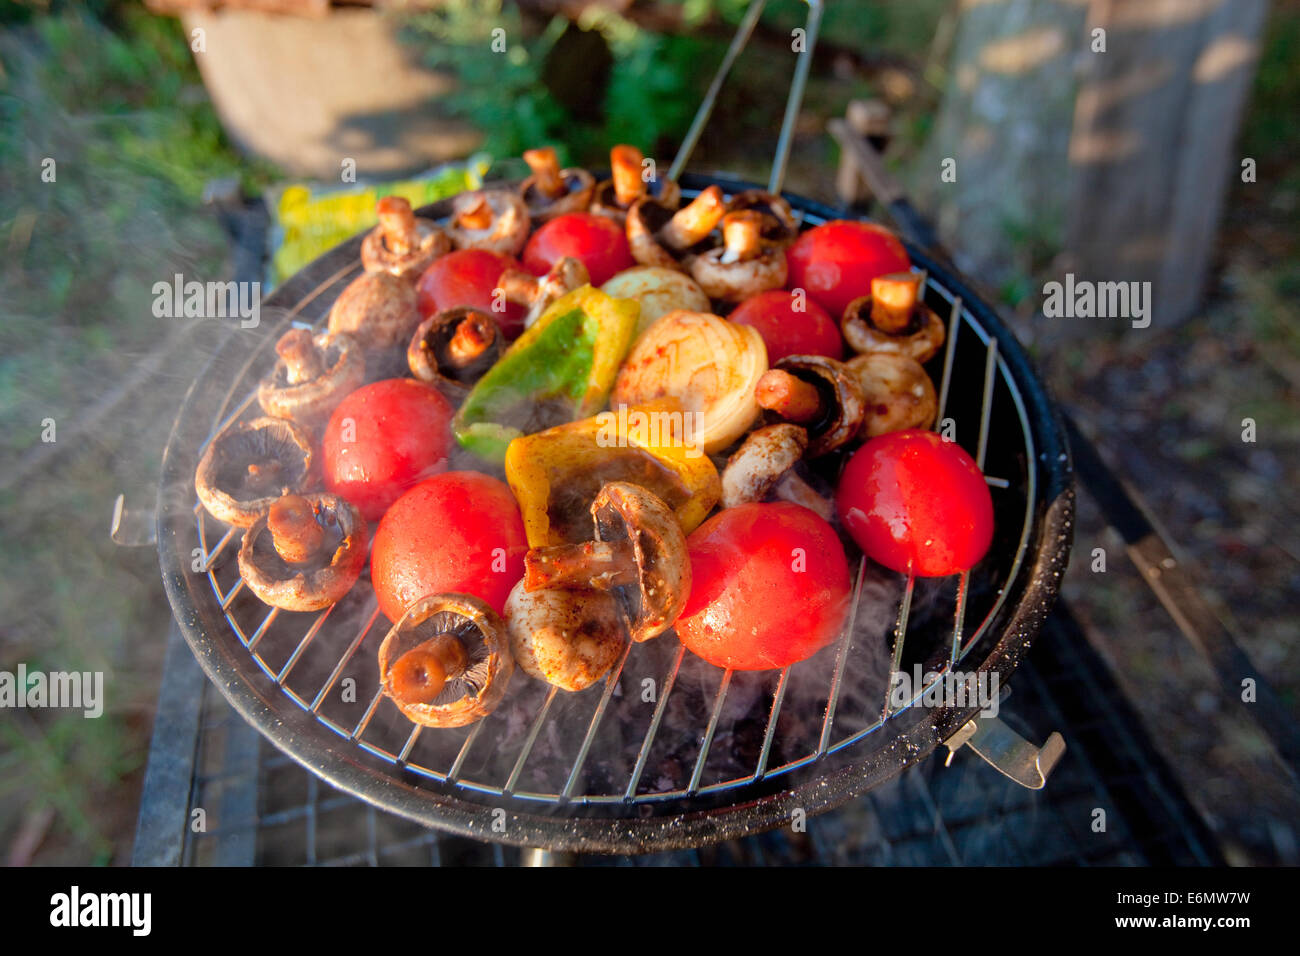 Grilling vegetables for the party outdoors Stock Photo